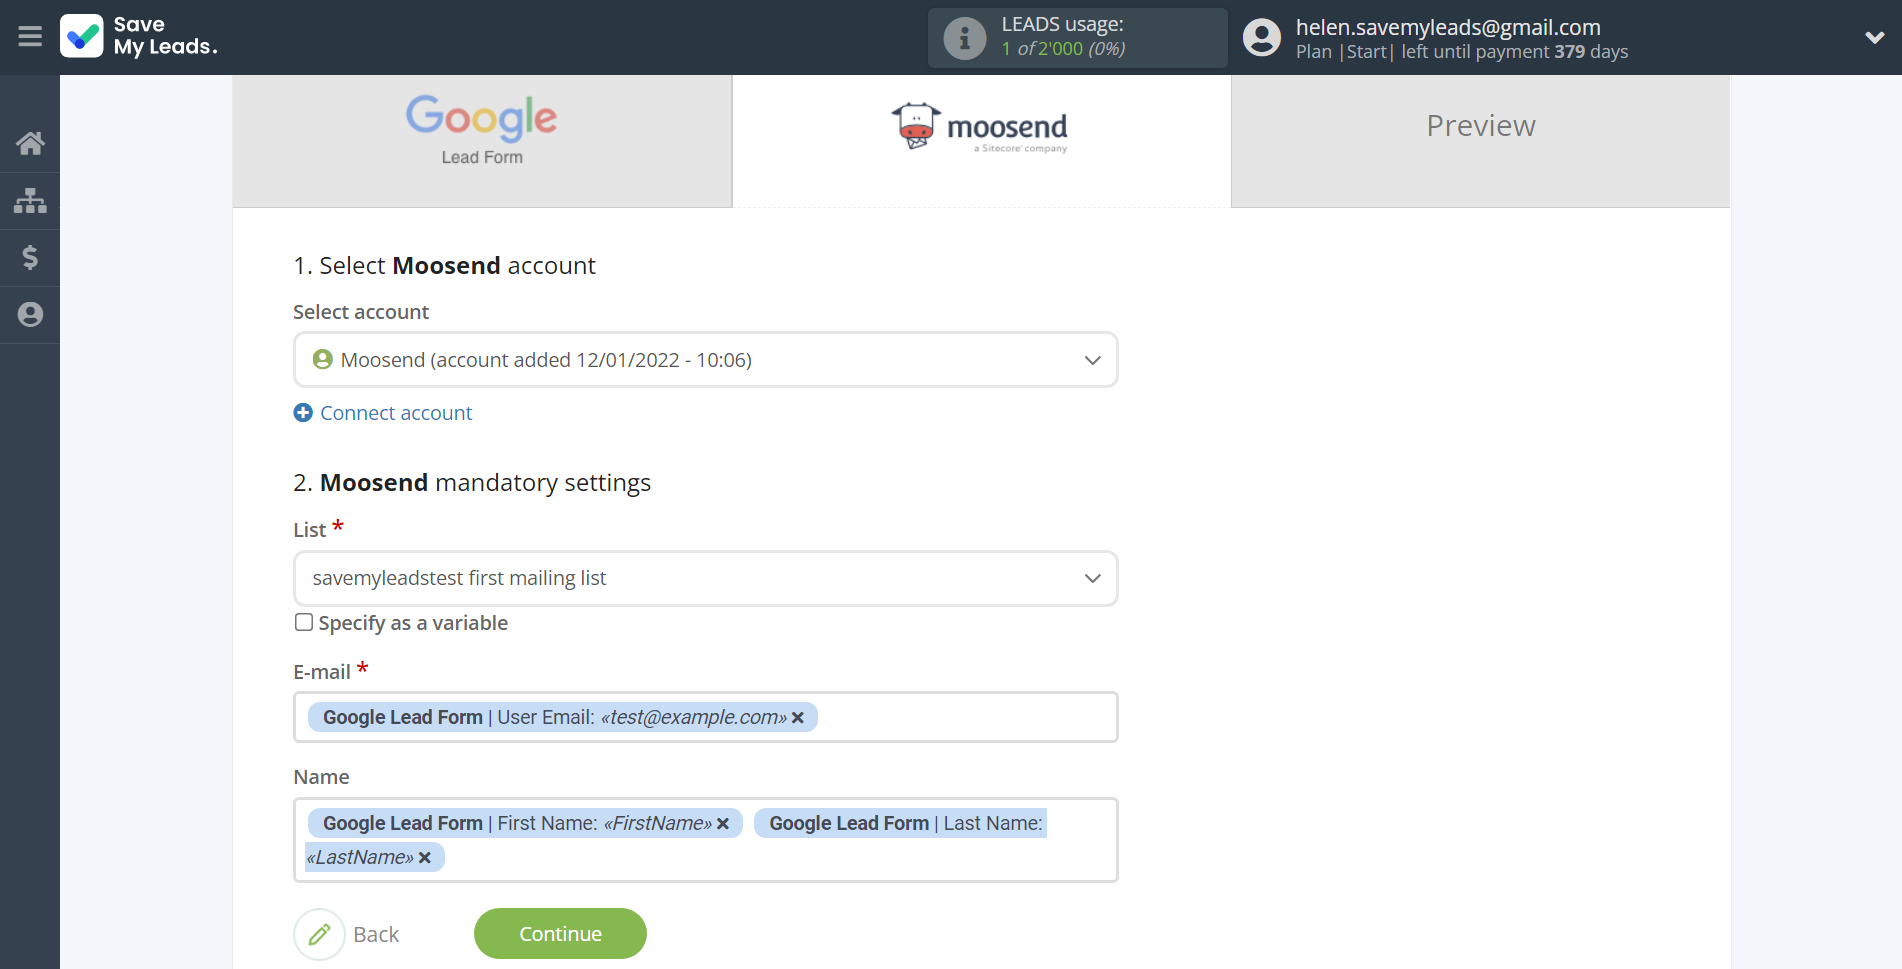 How to Connect Google Lead Form with Moosend | Assigning fields